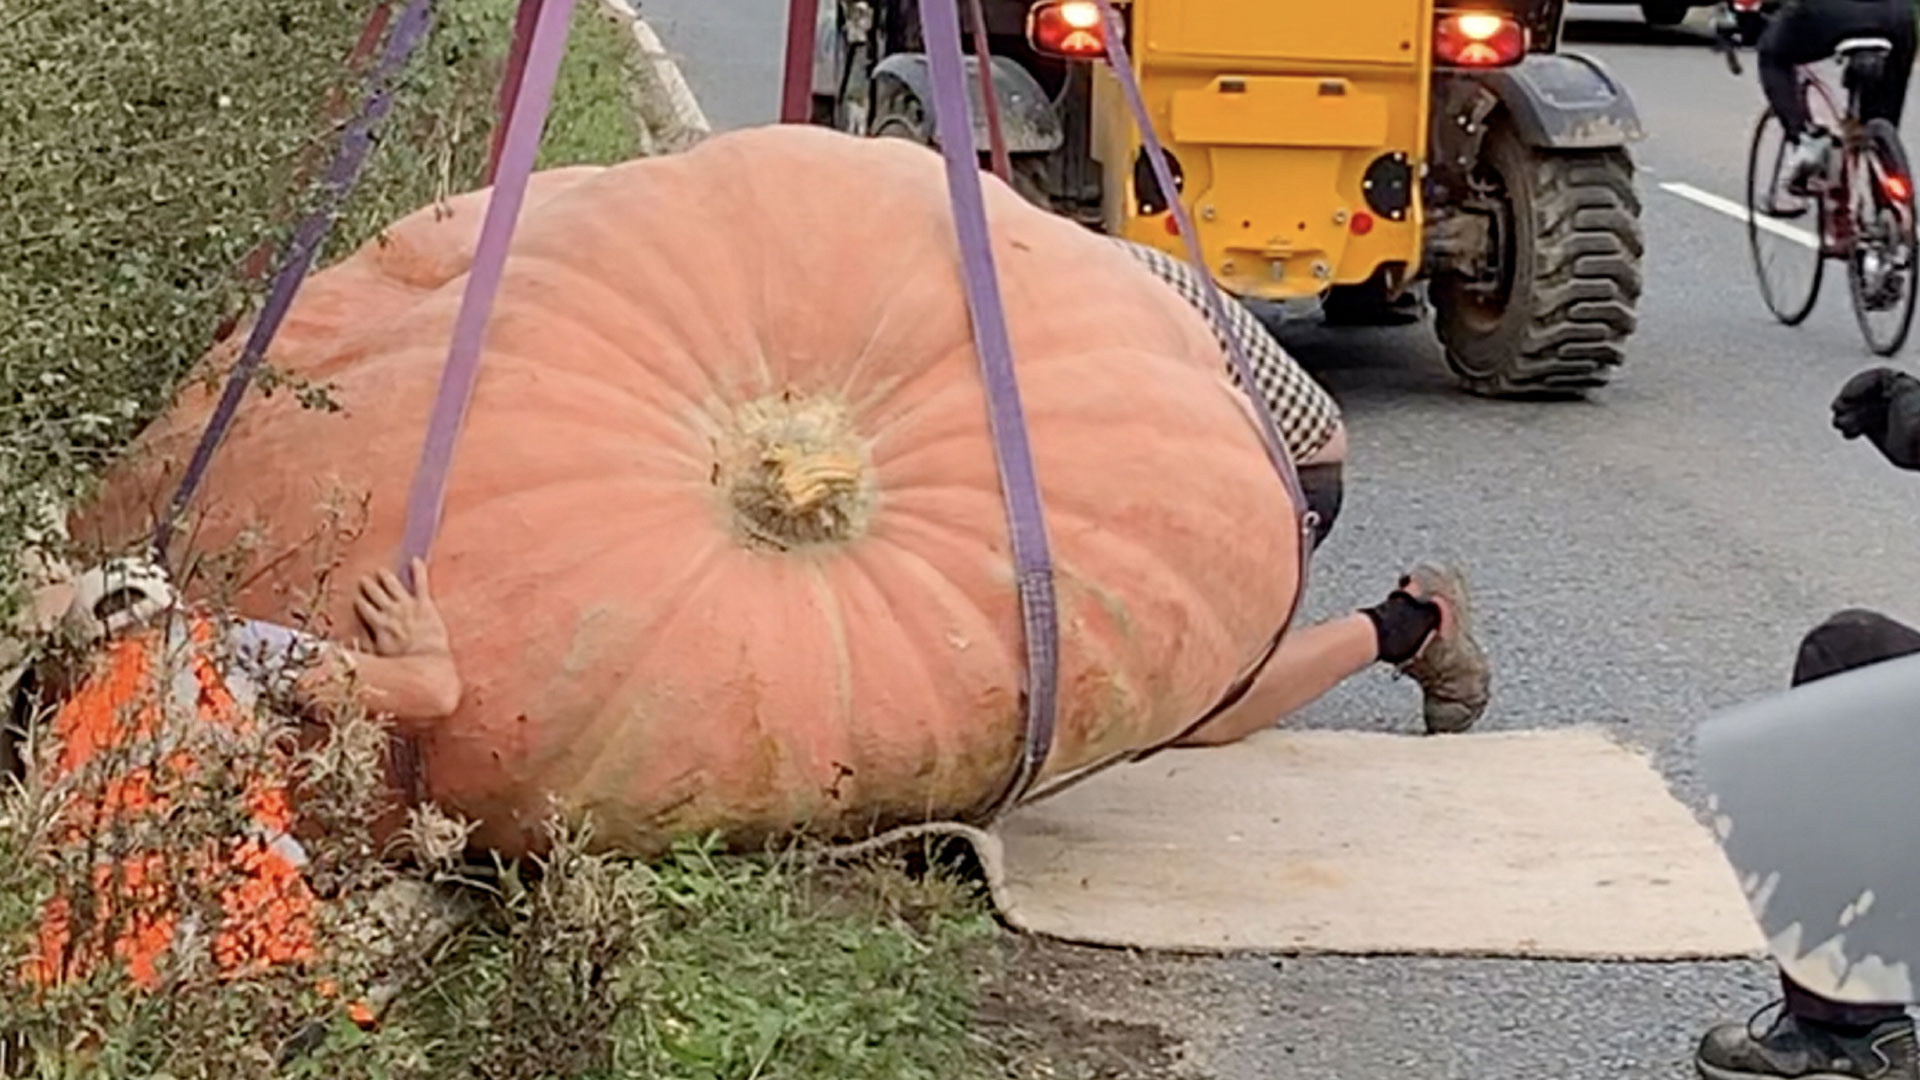 Britain’s biggest pumpkin, at 2,565lb, created traffic chaos after it fell from its trailer onto the busy roads.